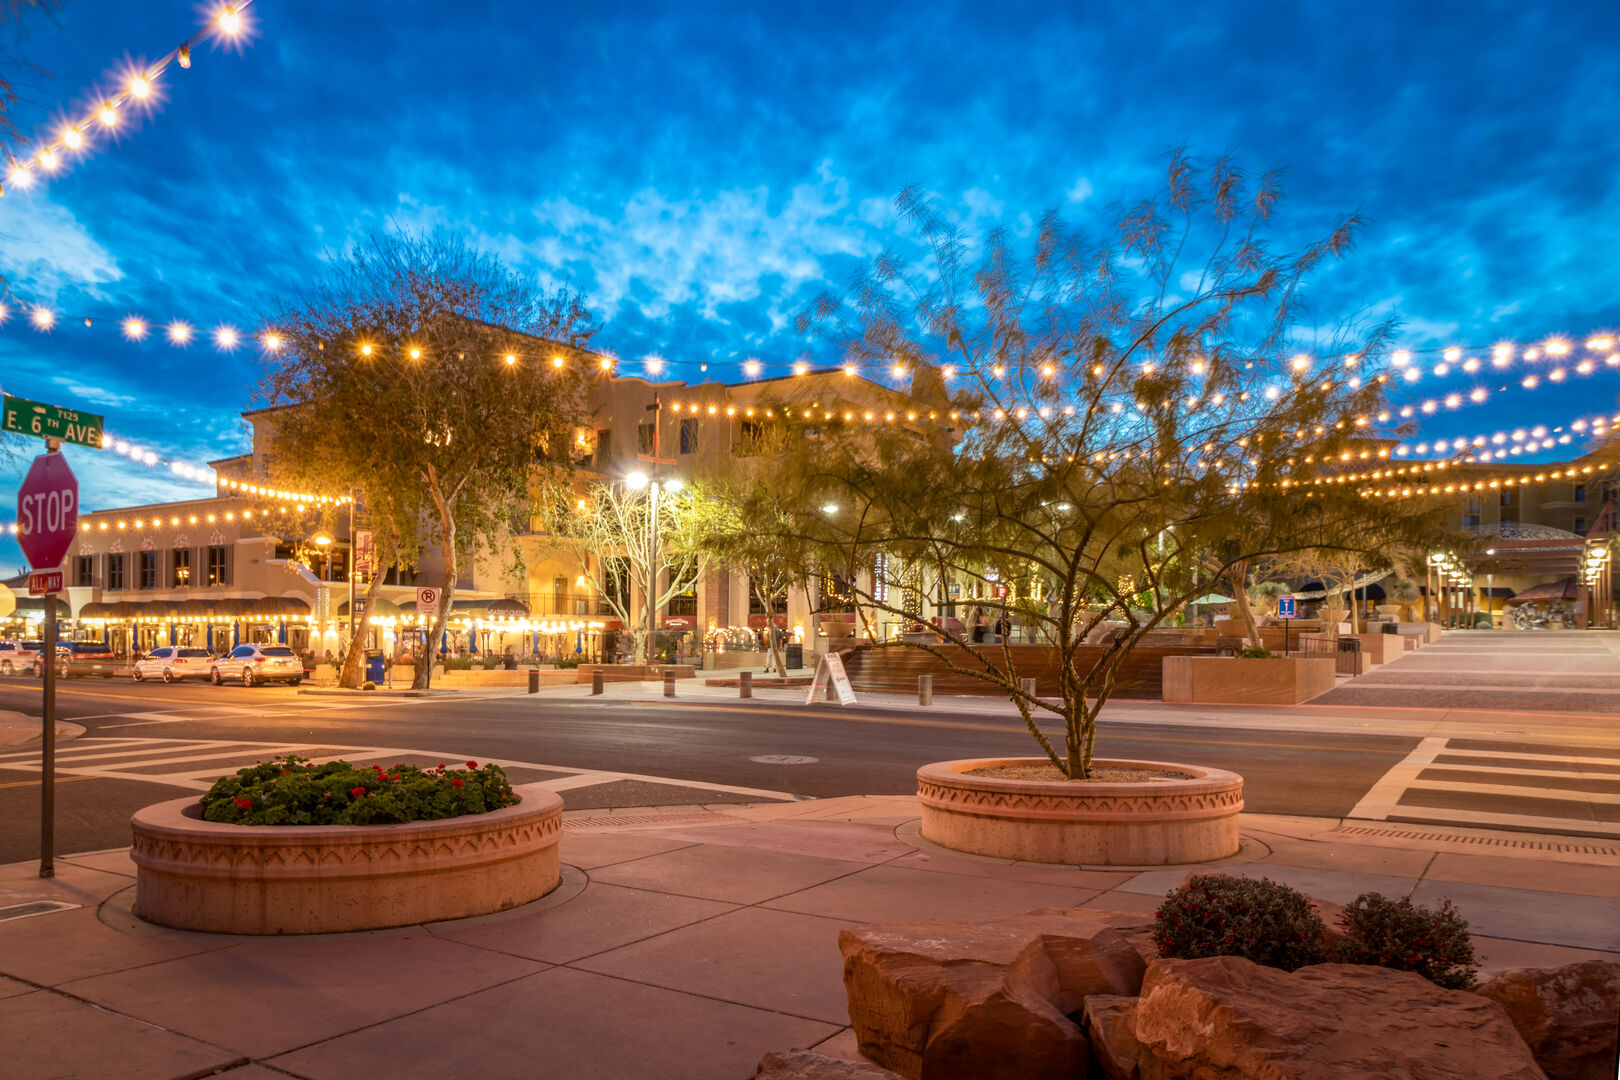 6th Ave outside Entrance facing South Bridge a stones throw away to Olive and Ivy, STK, Maple & Ash, Kazmierz, 40 Love, Farm & Craft, Fashion Square Mall - Everything Downtown Scottsdale has to Offer!